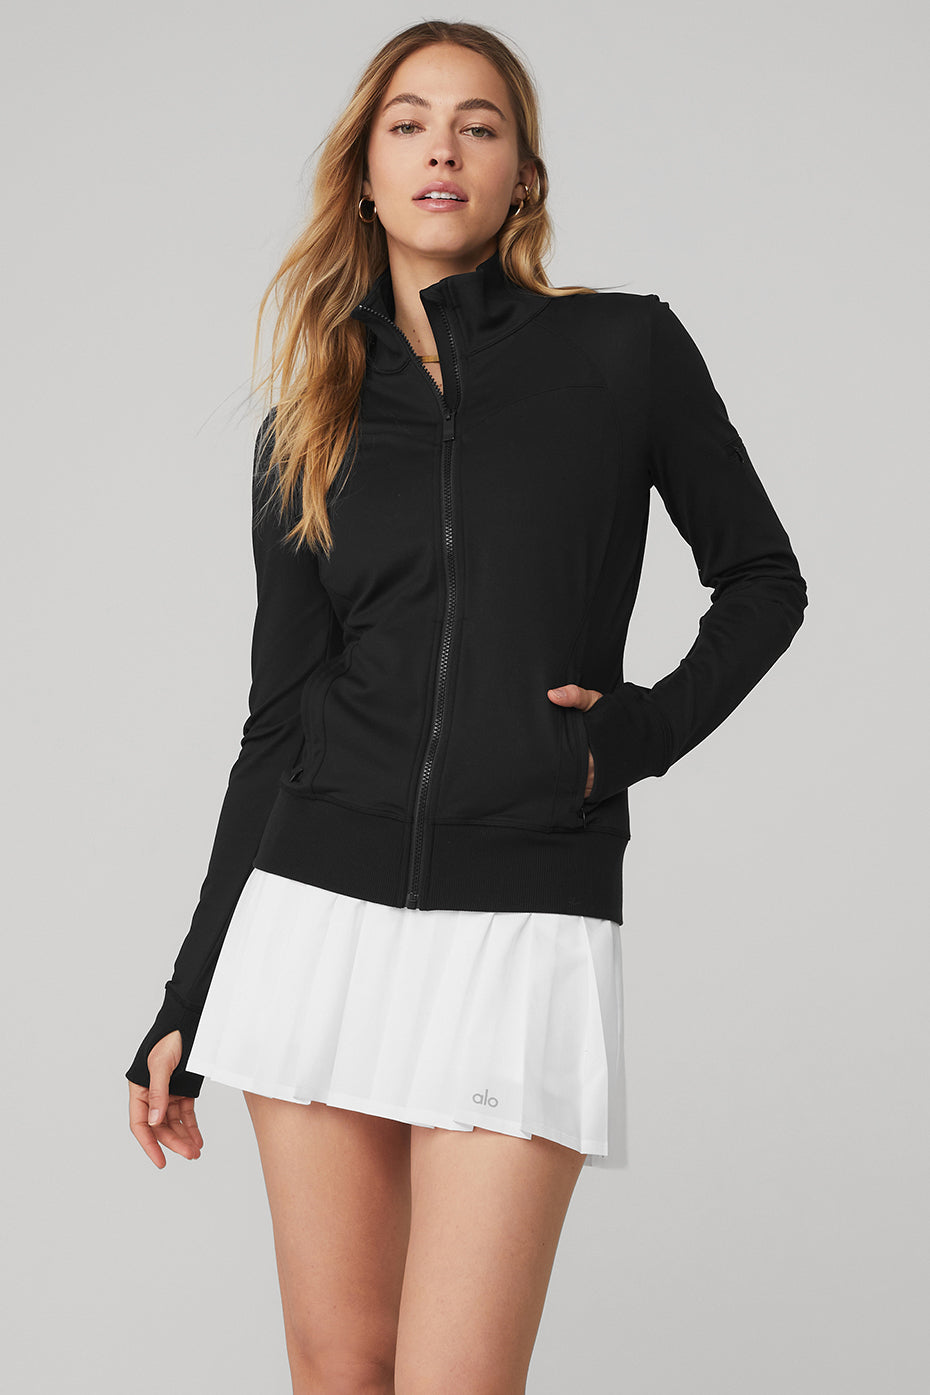 Contour Jacket in Black by Alo Yoga